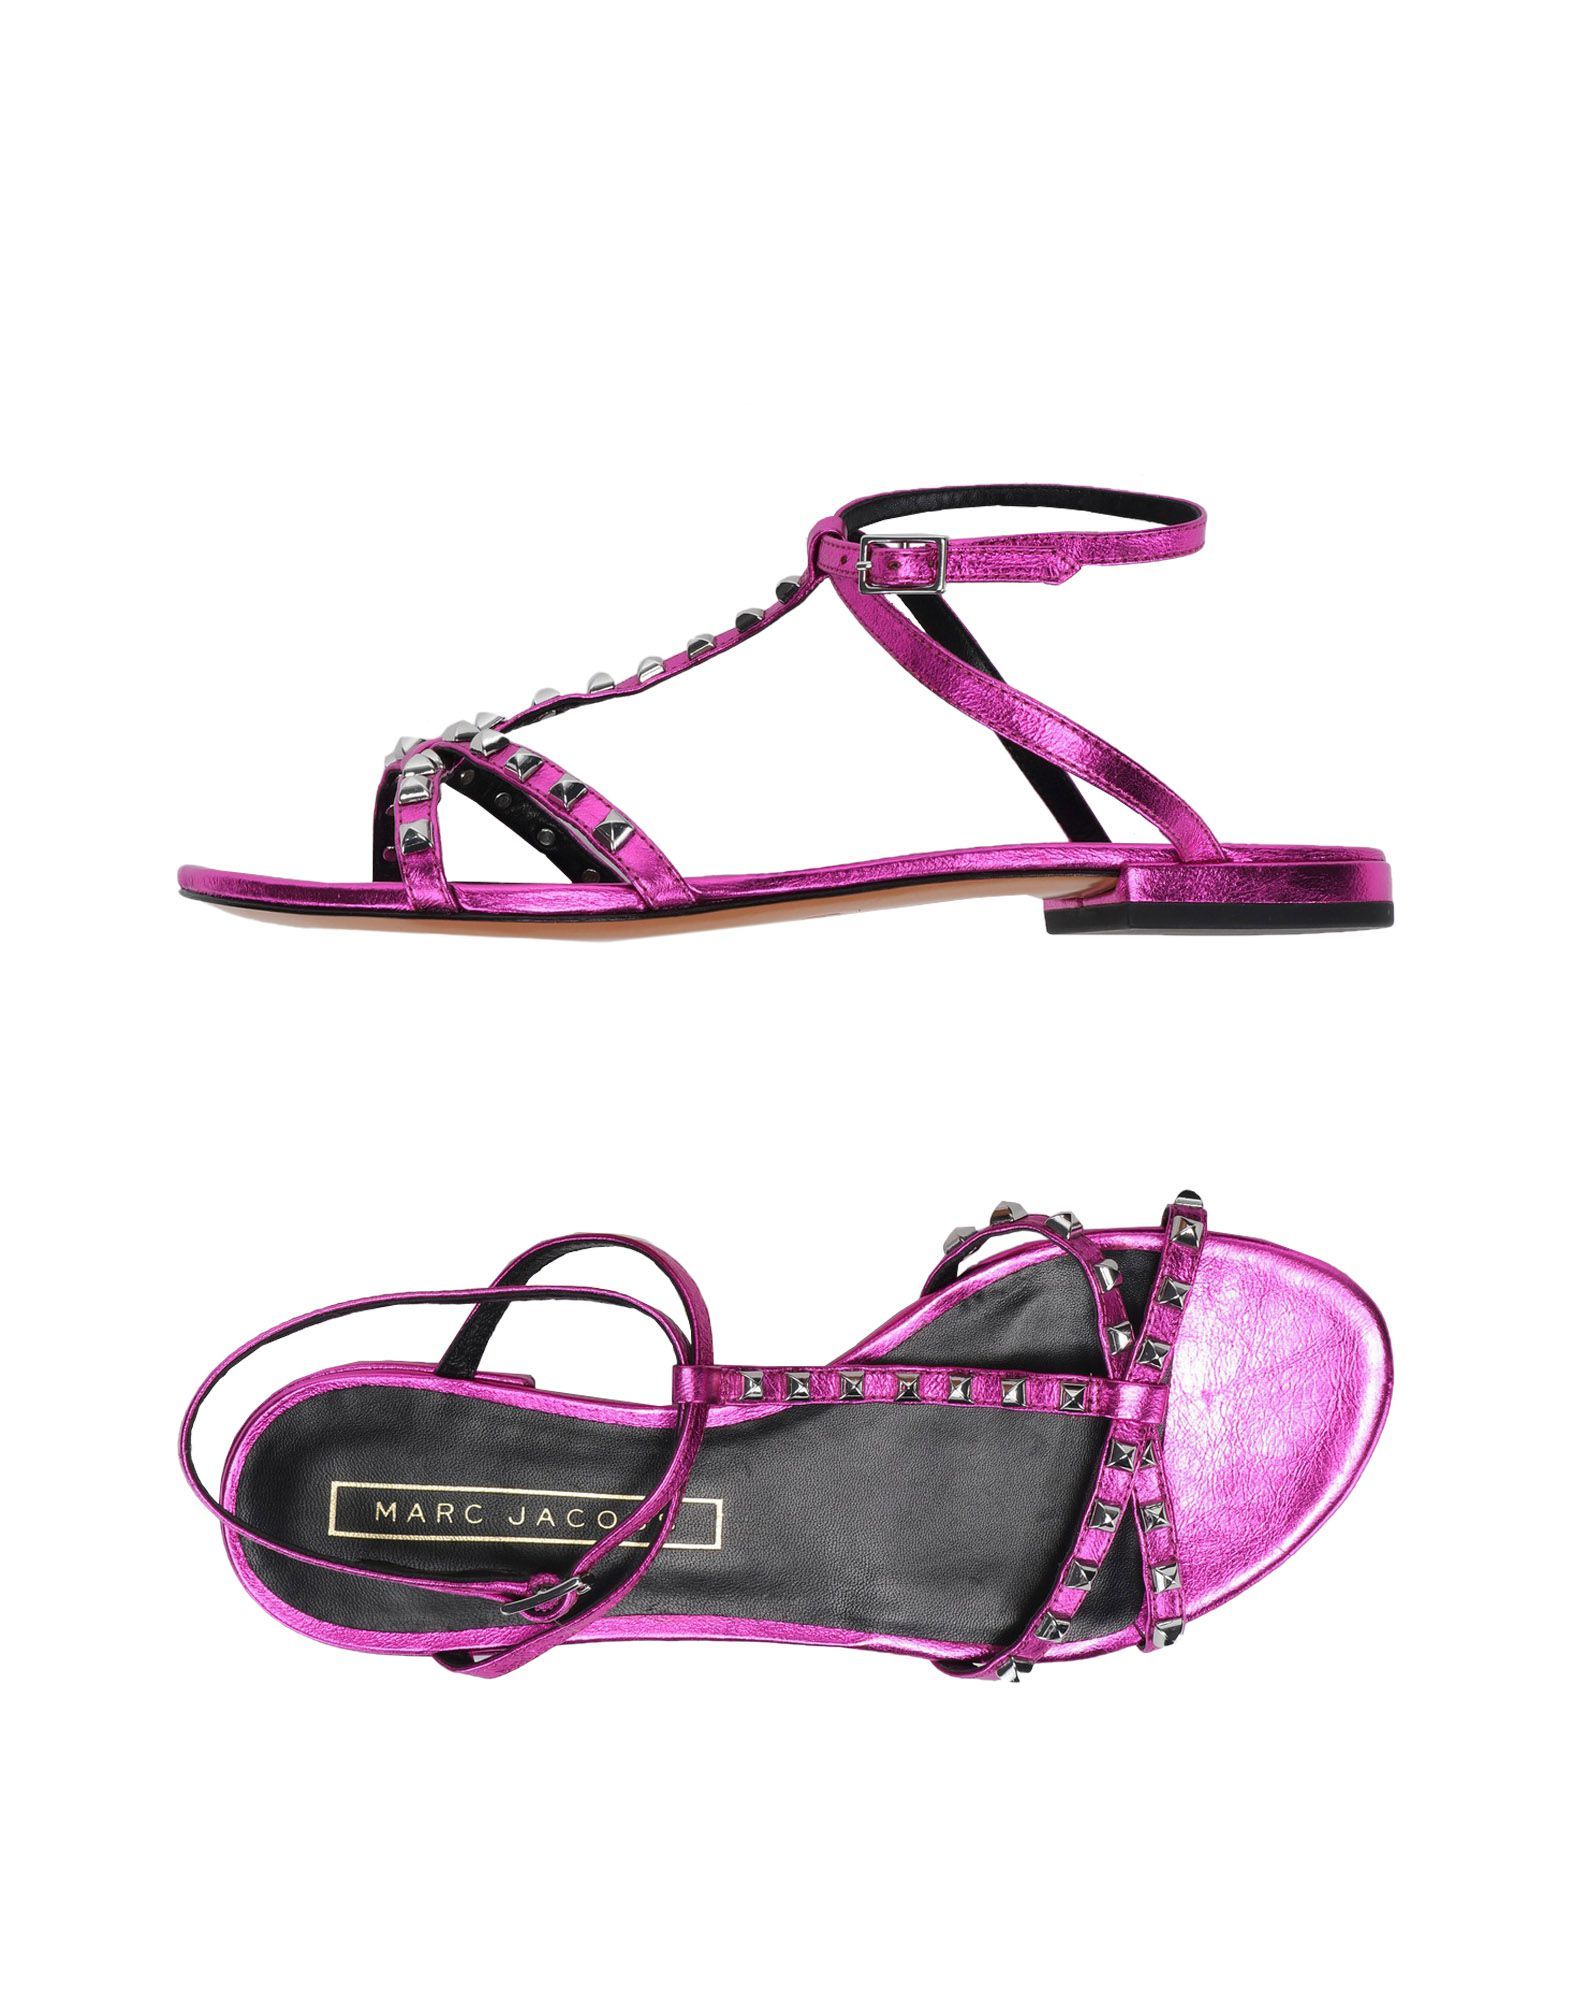 laminated effect, studs, solid colour, buckling ankle strap closure, round toeline, flat, leather lining, leather sole, contains non-textile parts of animal origin, large sized